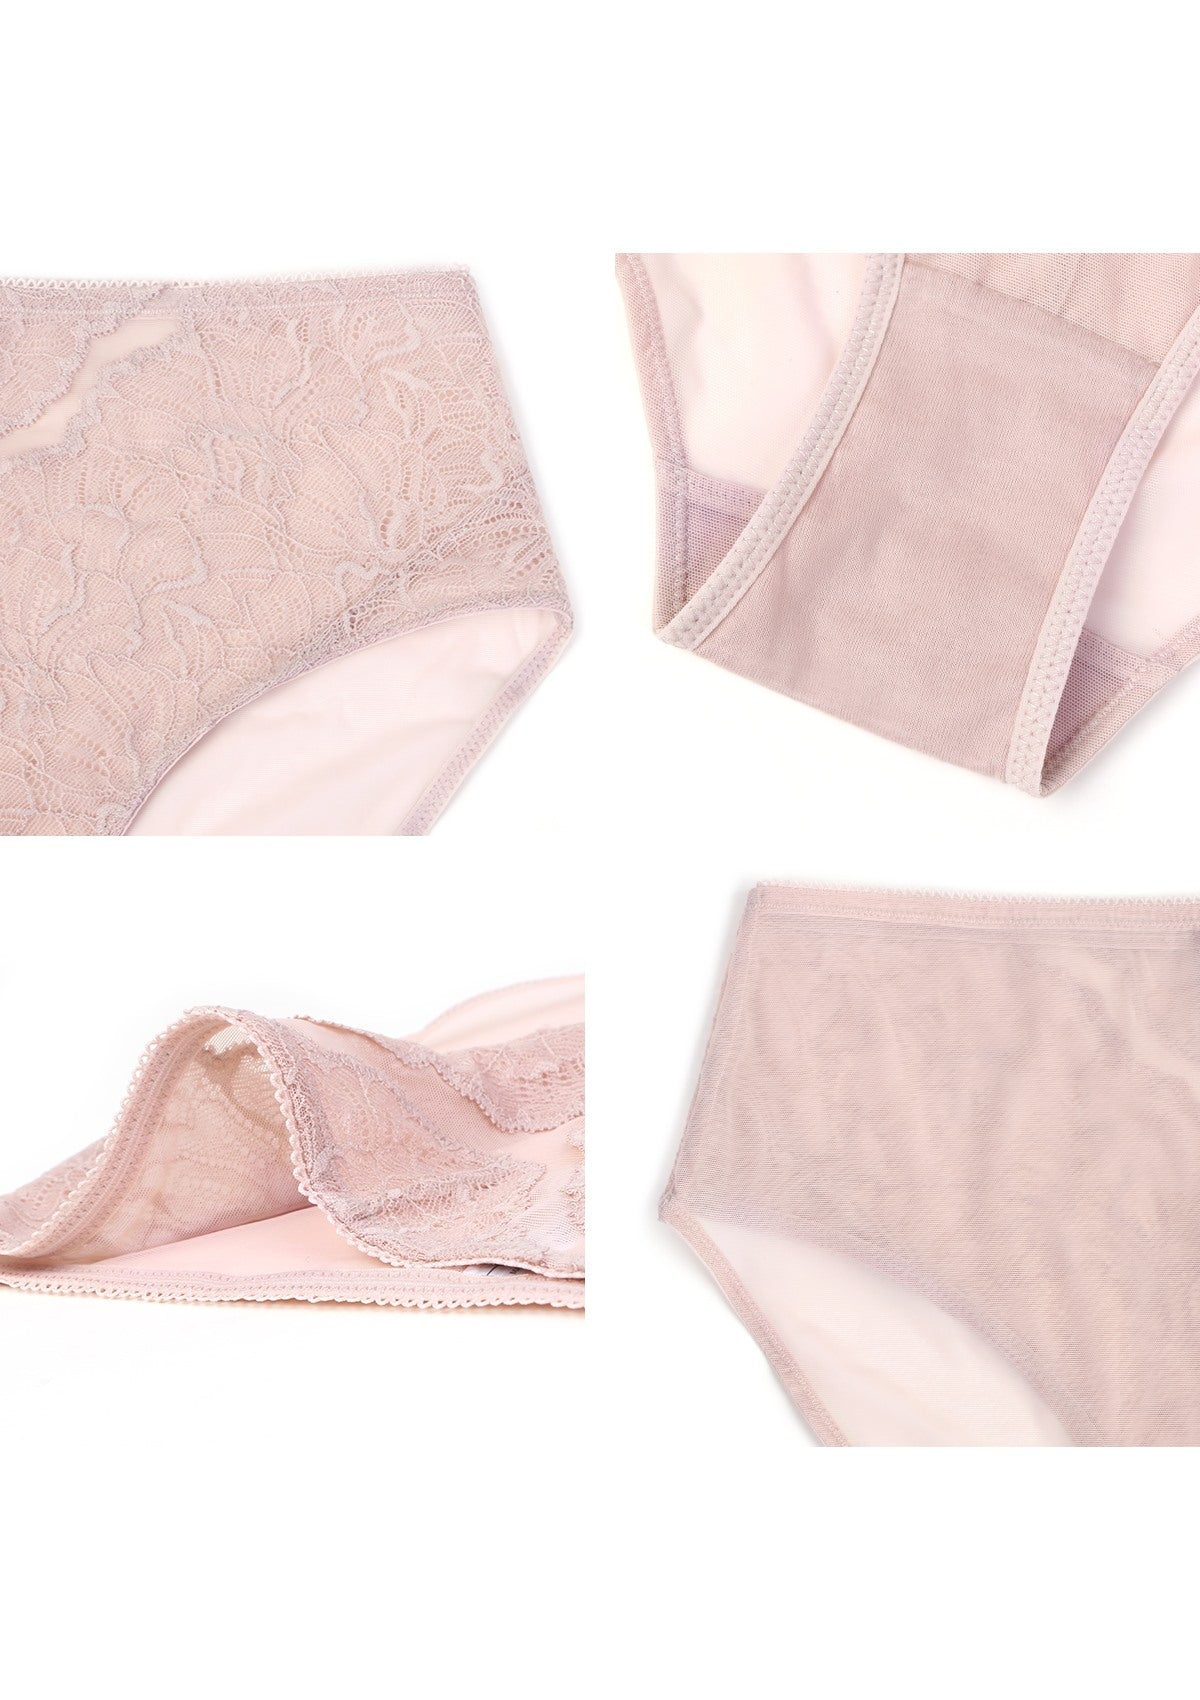 HSIA Blossom High-Rise Floral Lacy Panty-Comfort In Style - XXL / Dark Pink